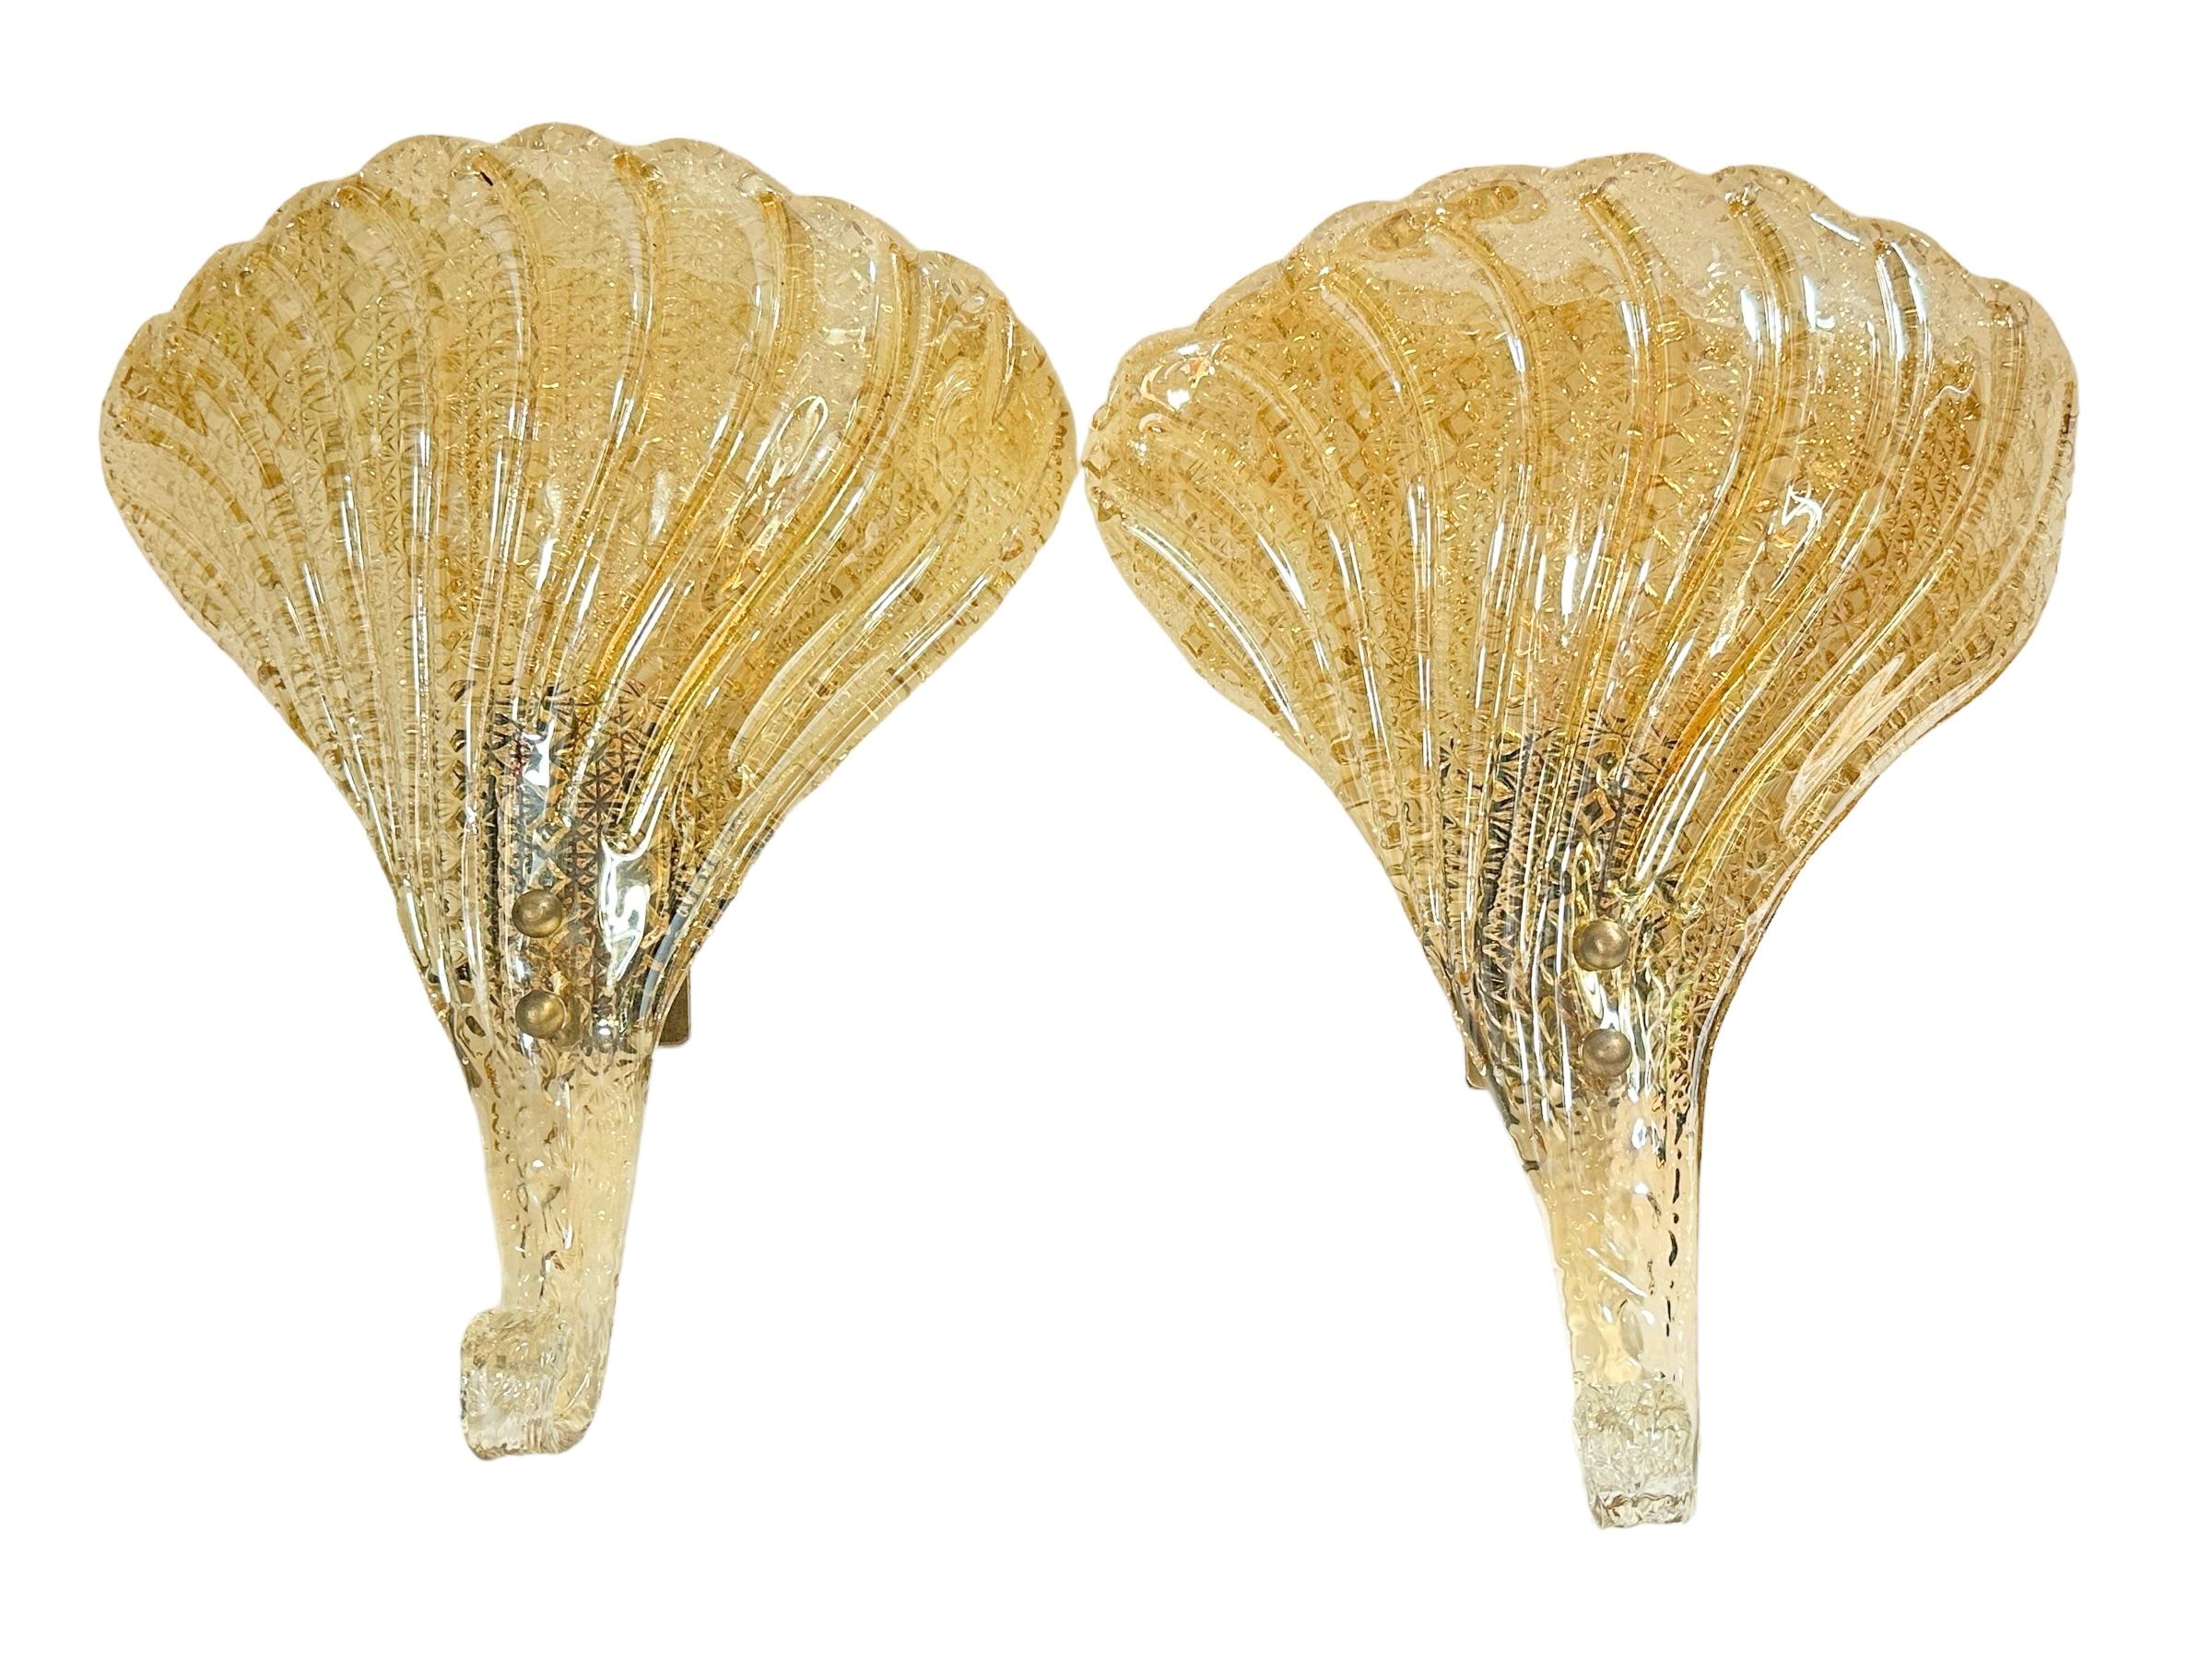 Incredible pair of mid century Murano glass leaf wall sconce with heavy brass fixture. This wonderful piece was designed in Italy by Barovier & Toso during the 1960s.
Each sconce is outstanding as the way the leaf is designed in detail on the edges